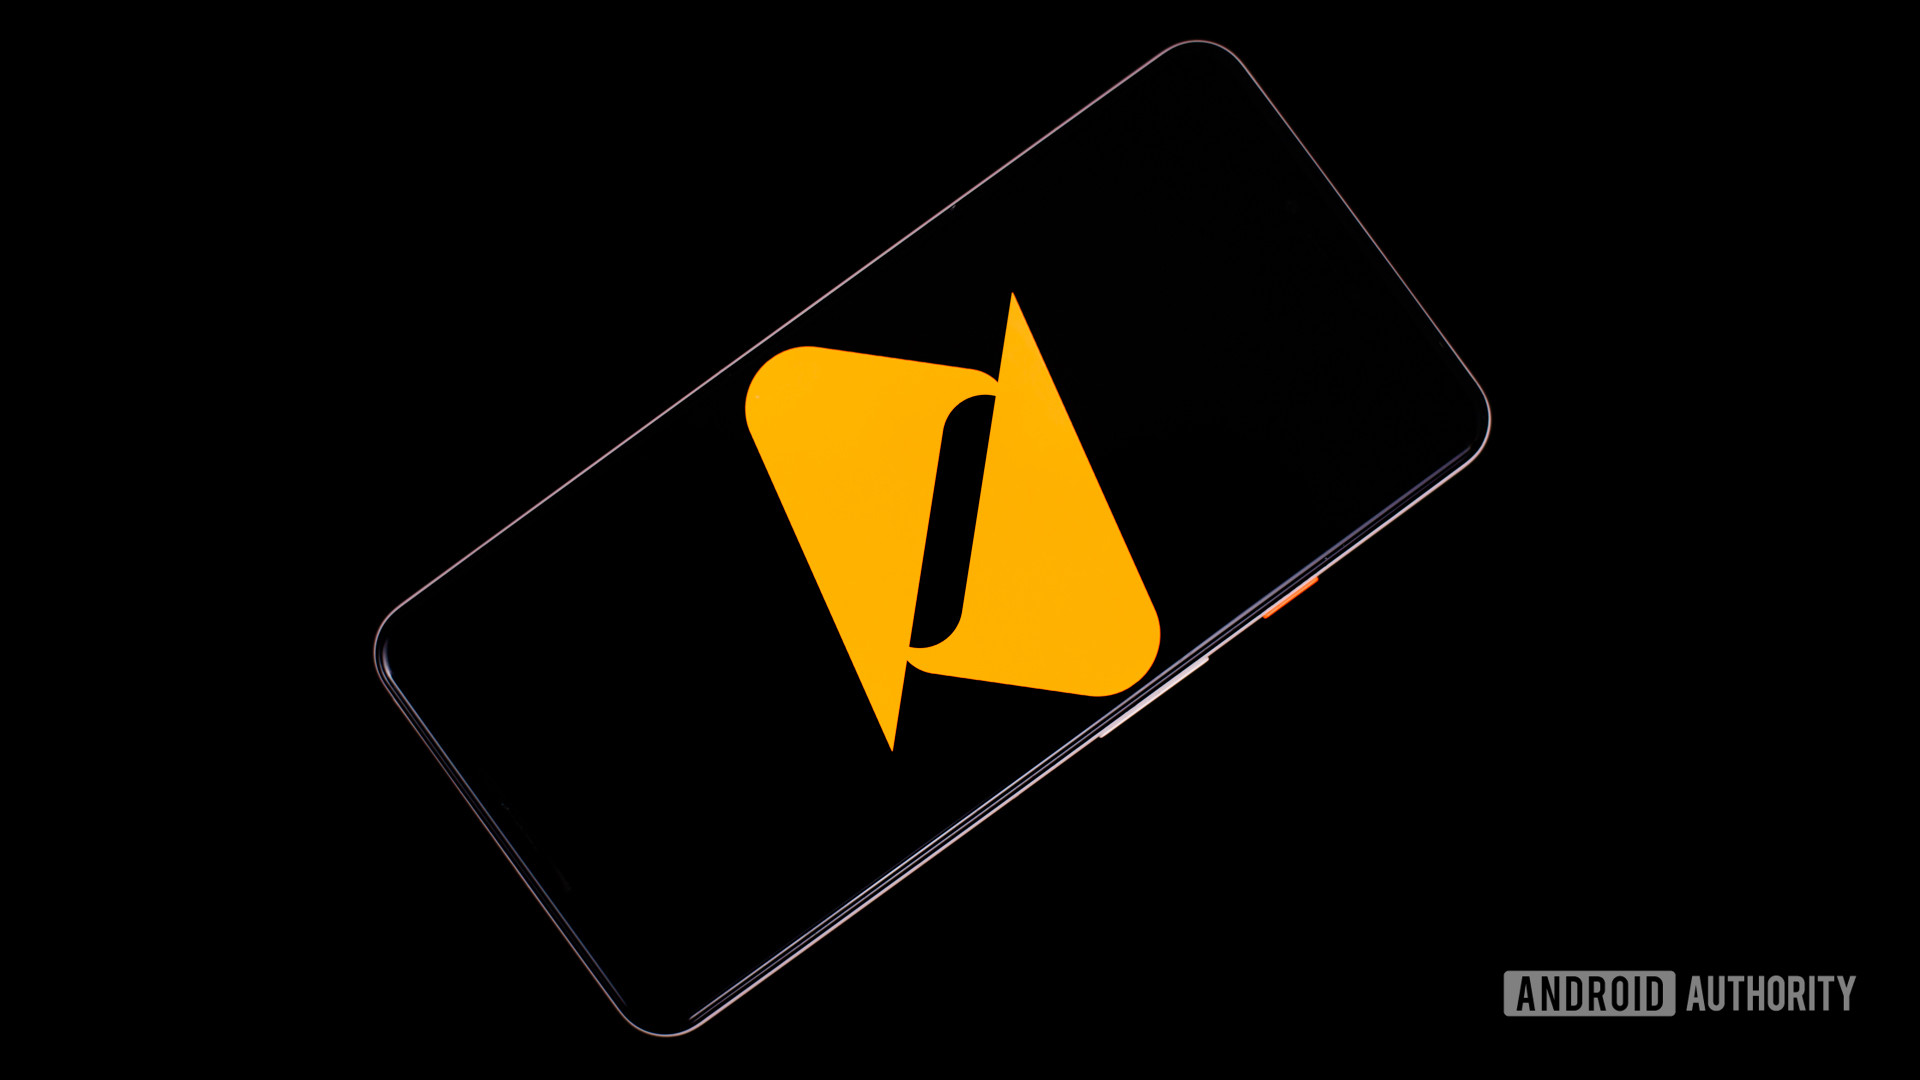 The Boost Mobile logo on a smartphone phone shown against a black background.